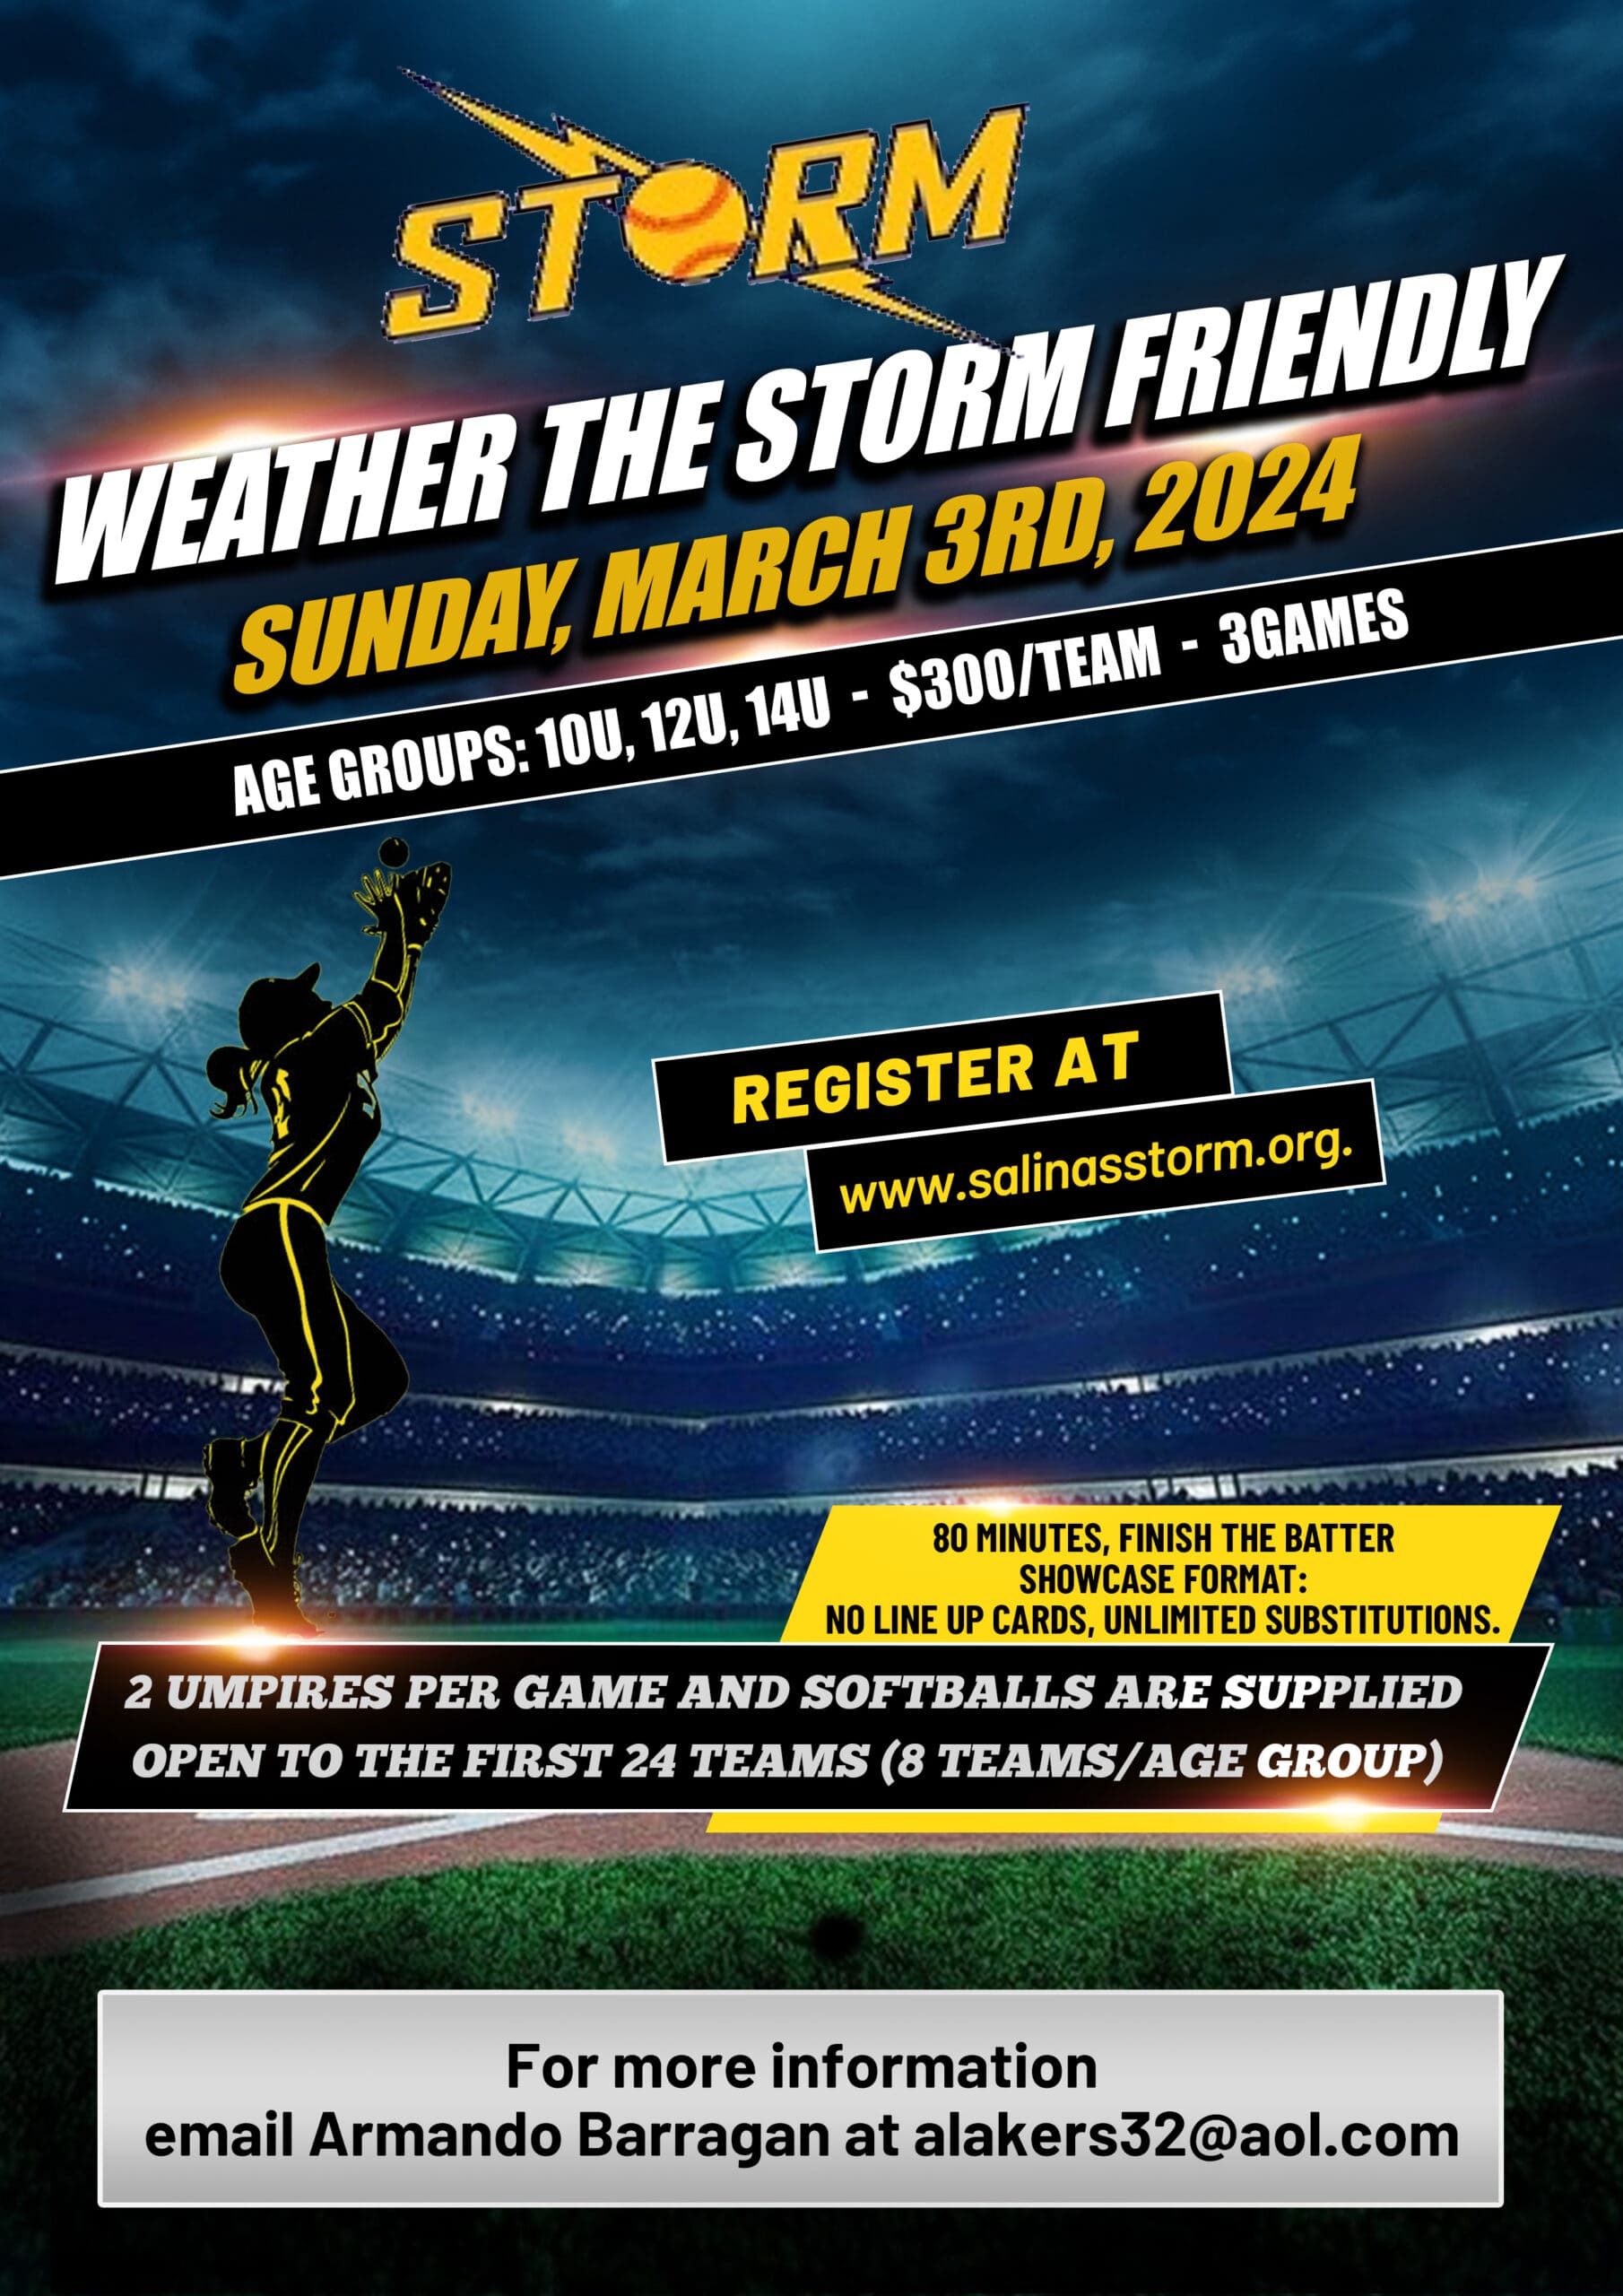 2024 Weather the Storm Friendly